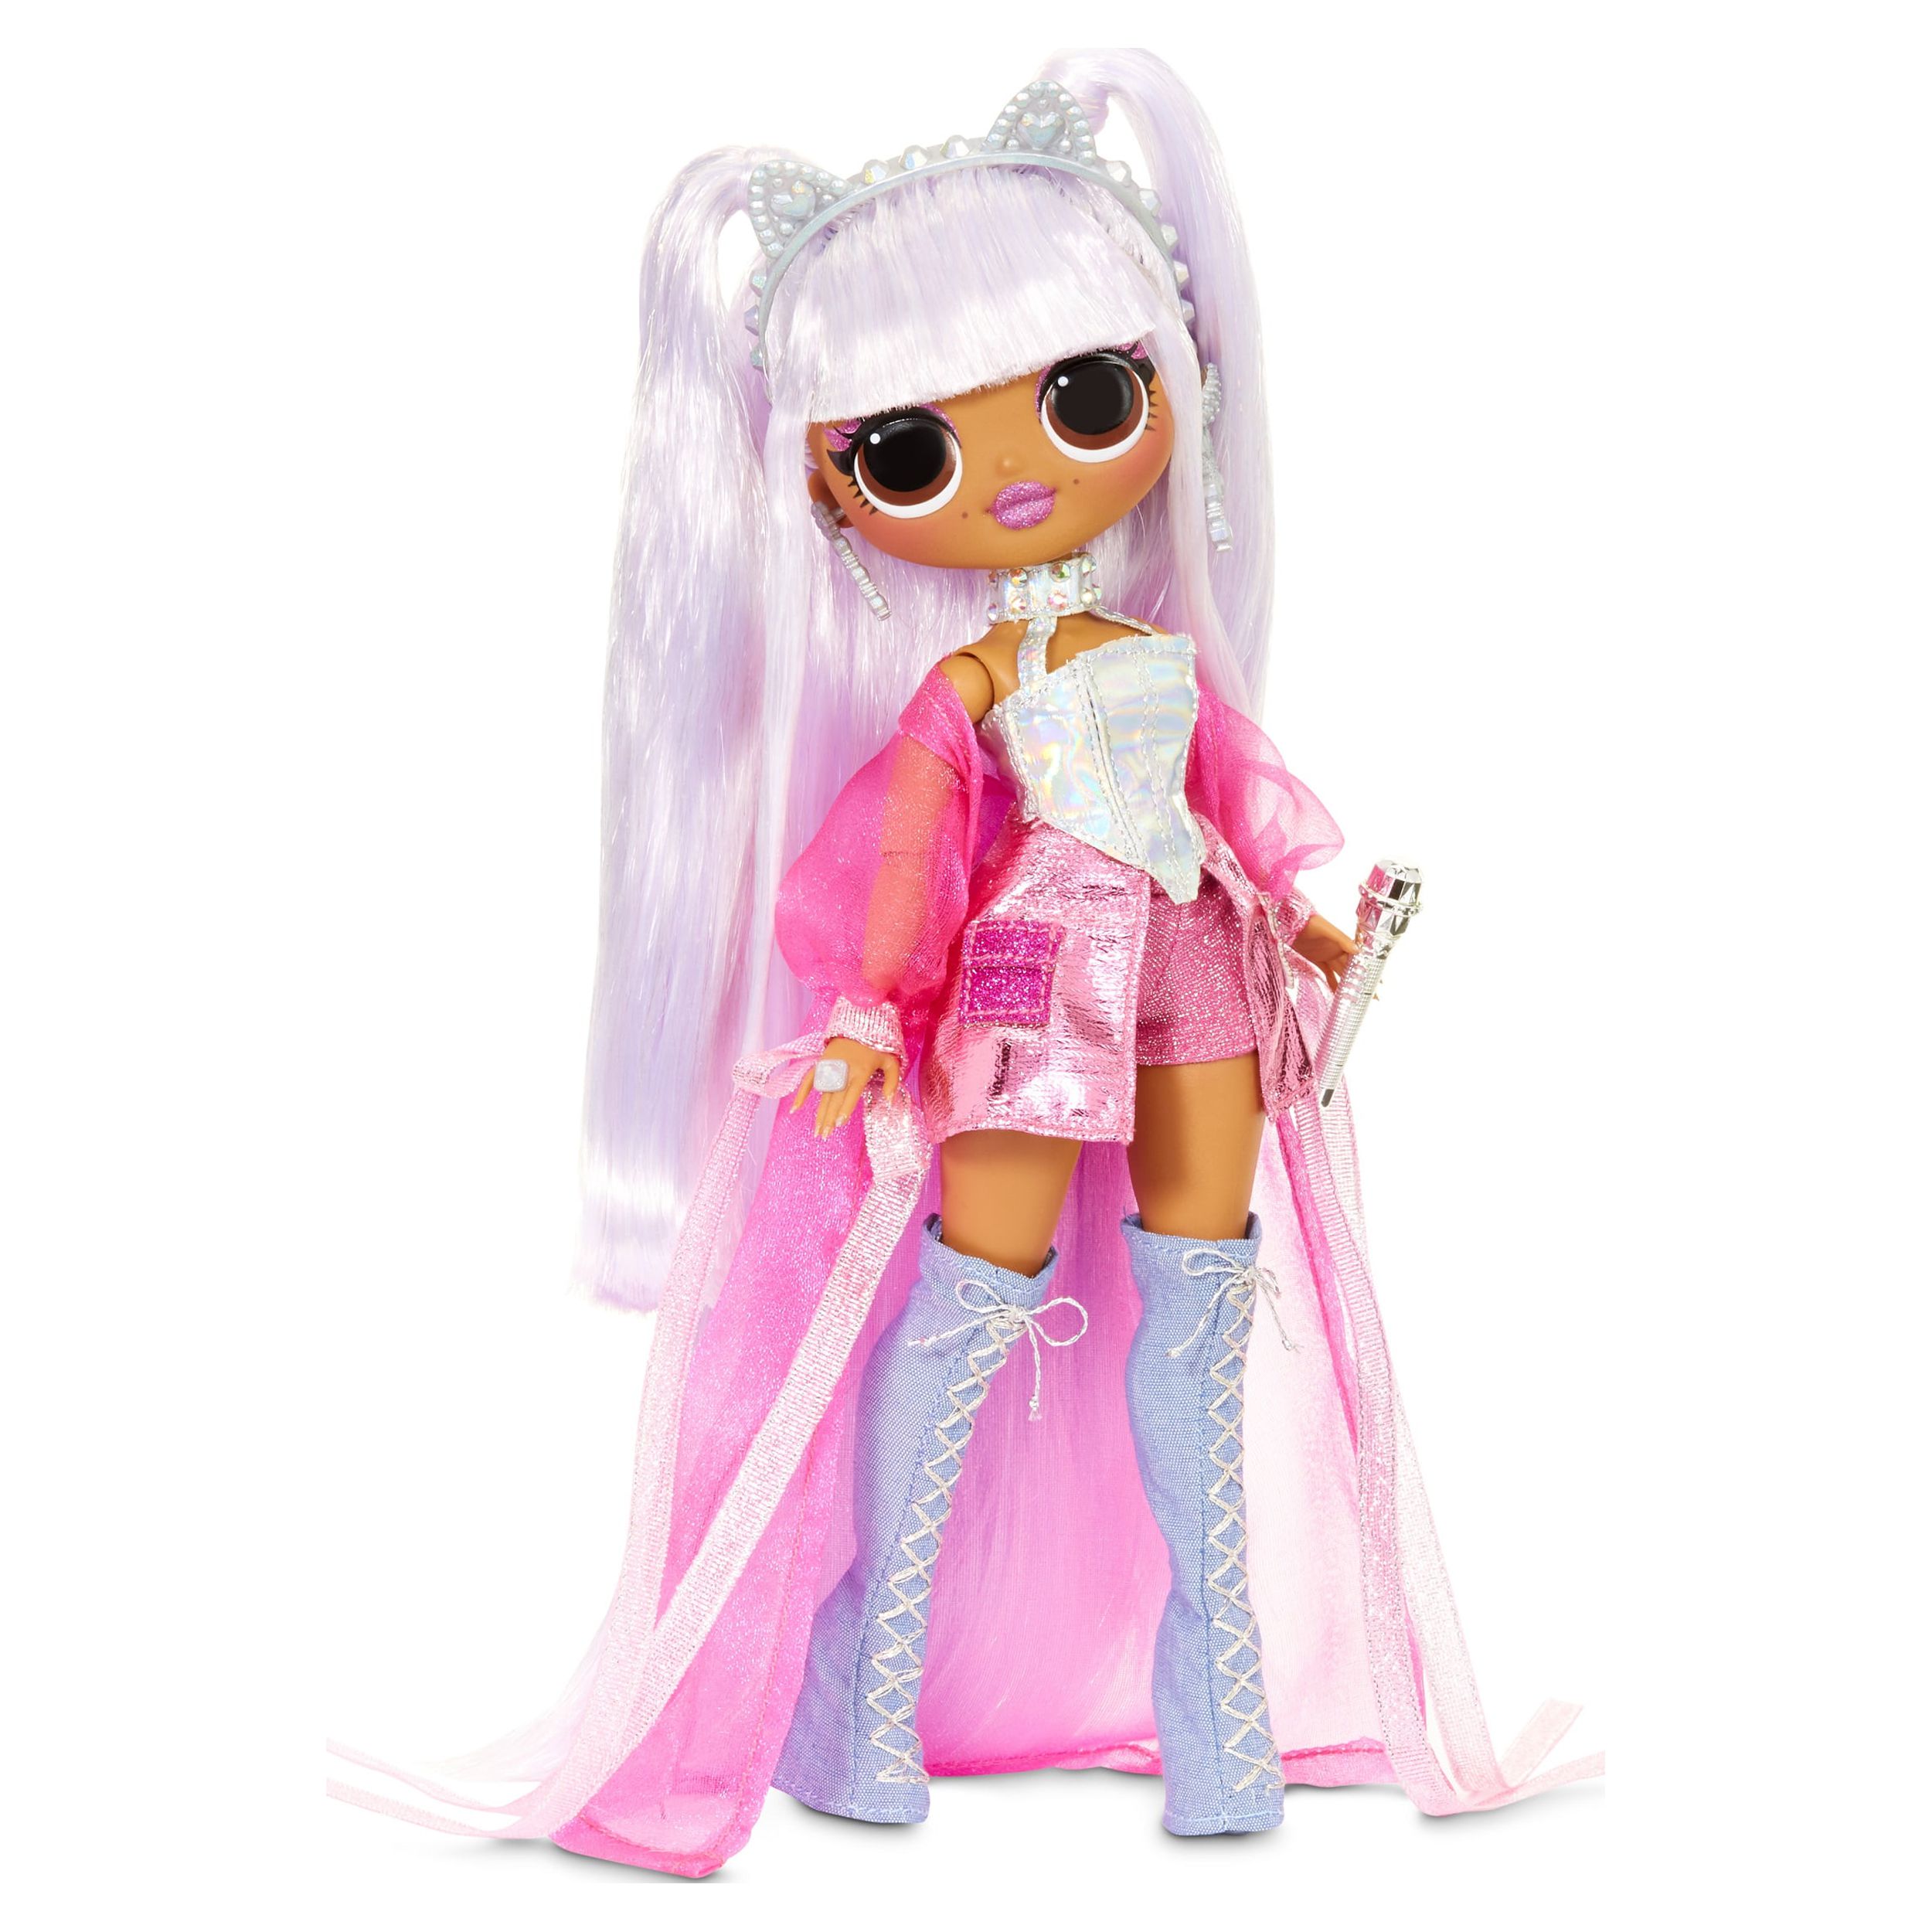 LOL Surprise OMG Remix Kitty K Fashion Doll – with 25 Surprises Including Extra Outfit, Shoes, Hair Brush, Doll Stand, Lyric Magazine, and Record Player Package that Plays Music - For Girls Ages 4+ - image 1 of 8